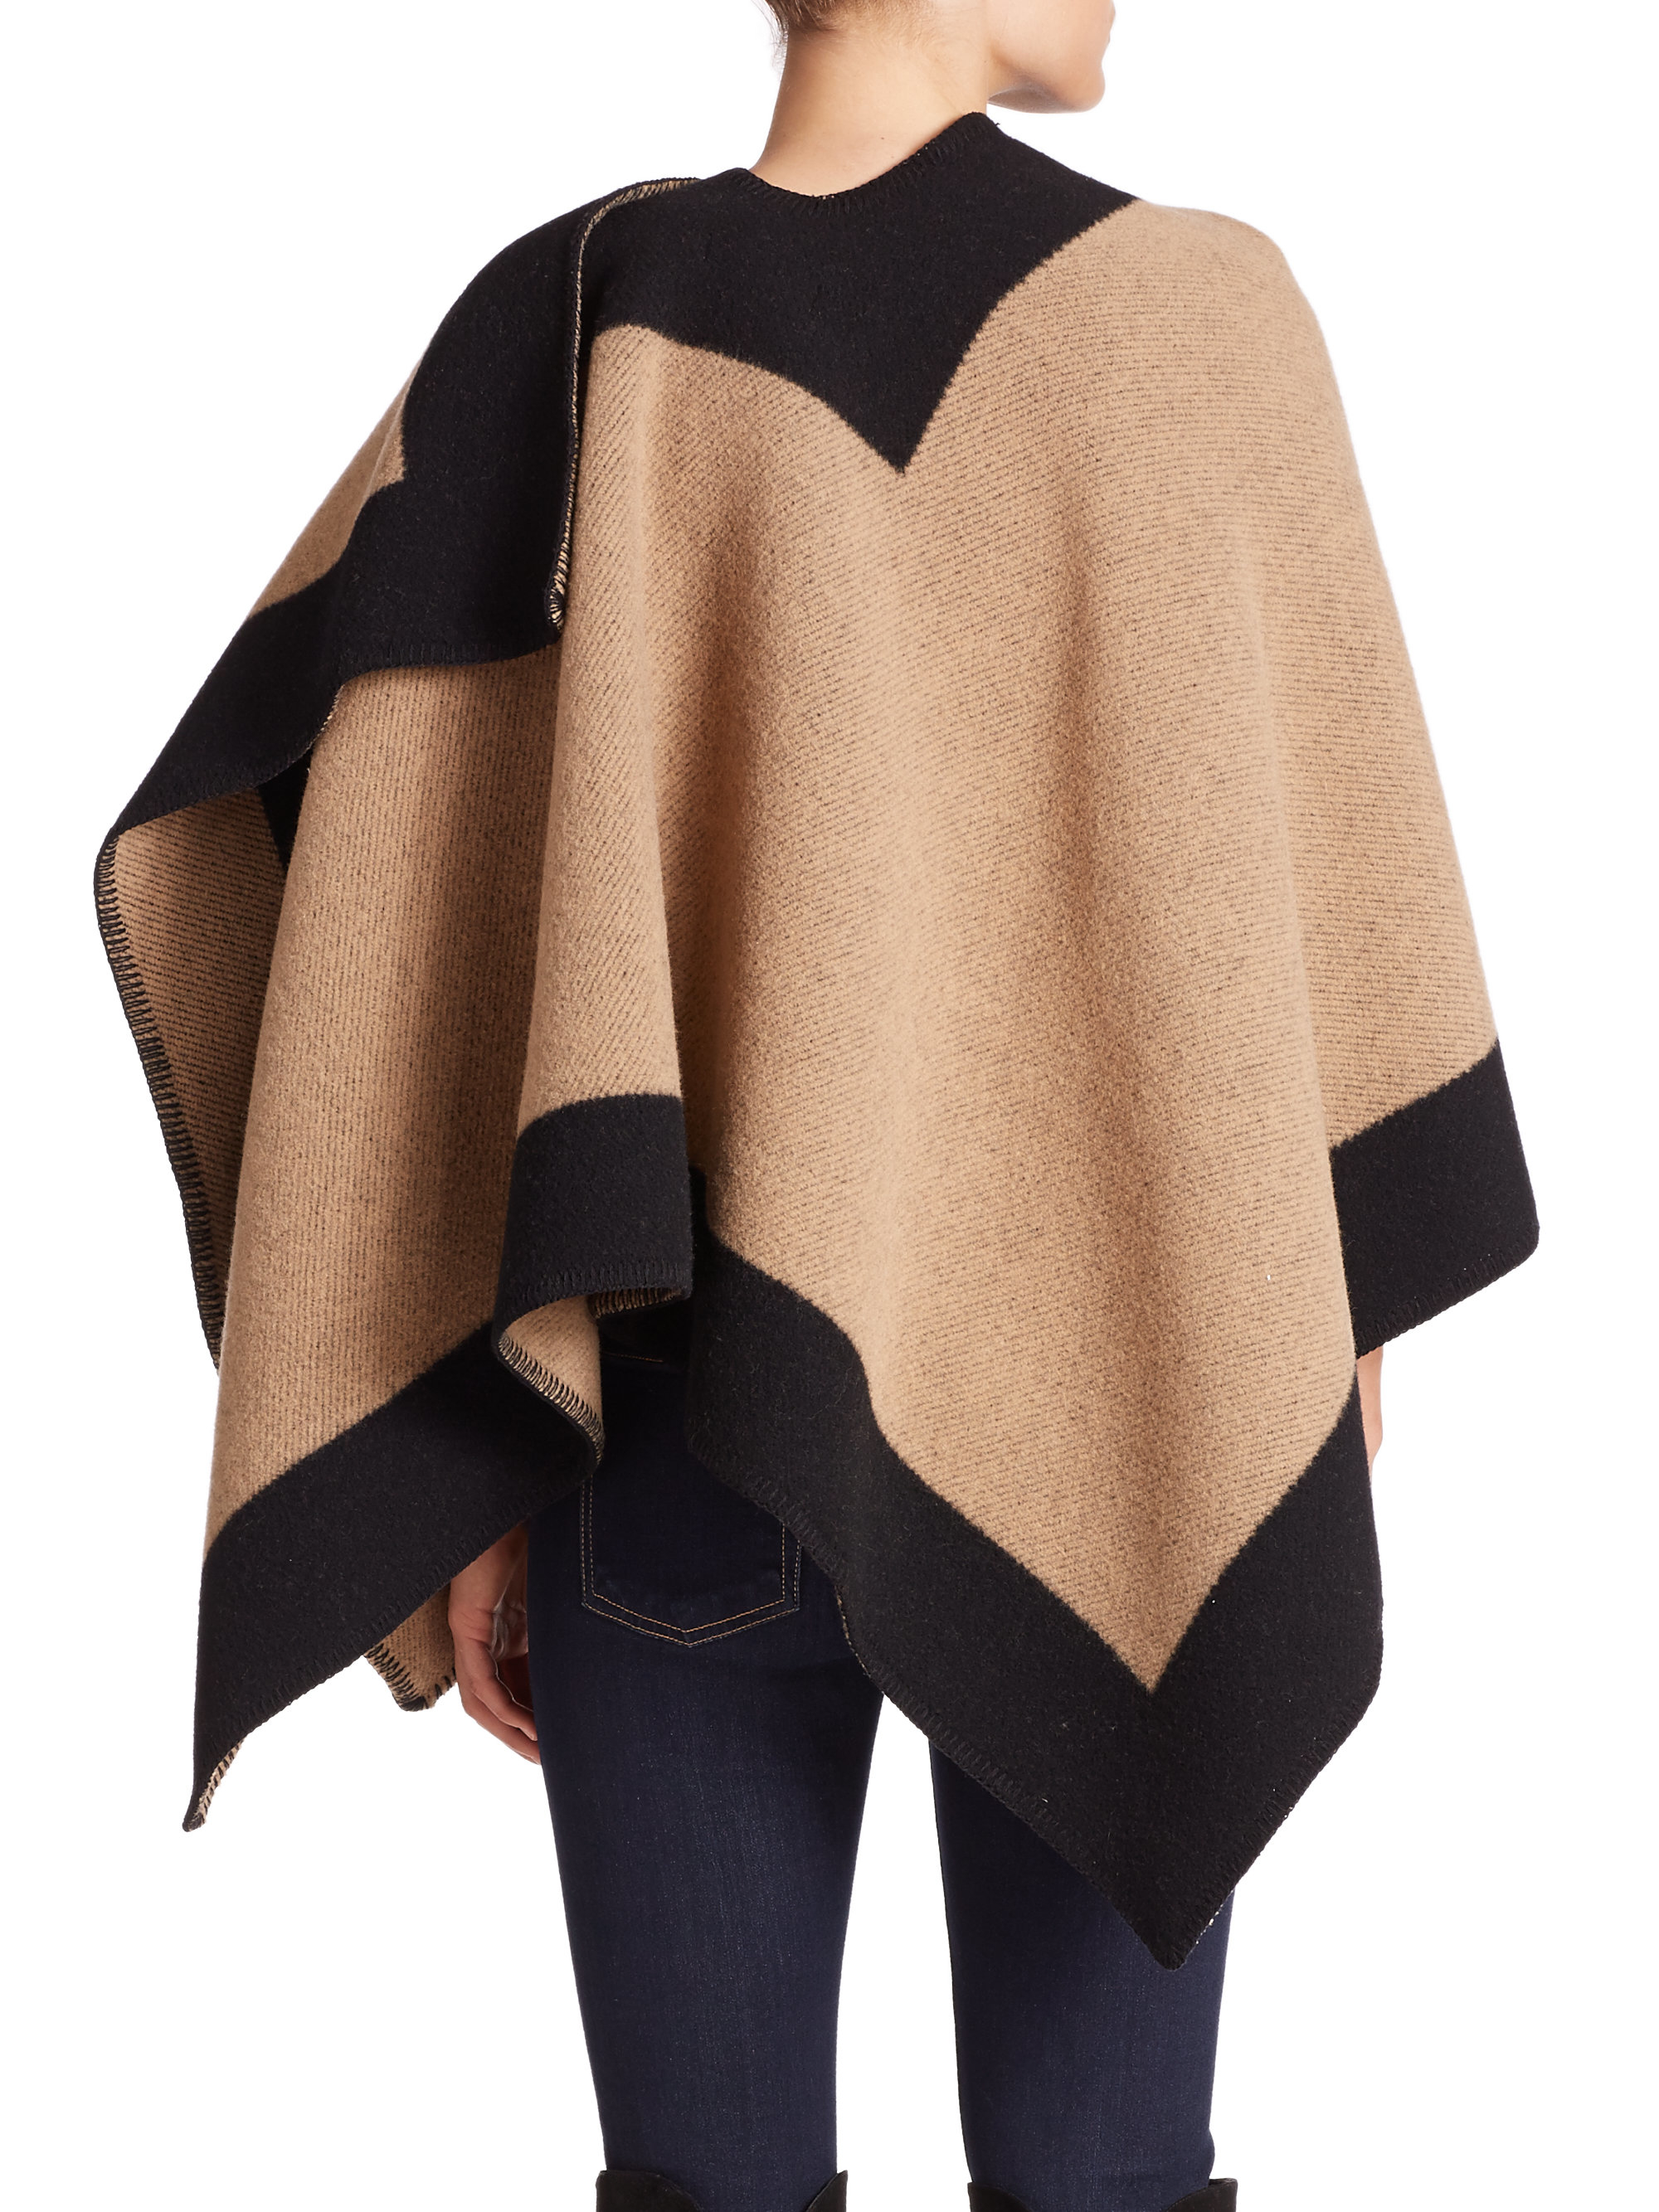 Lyst - Burberry Bordered Wool & Cashmere Shawl in Brown